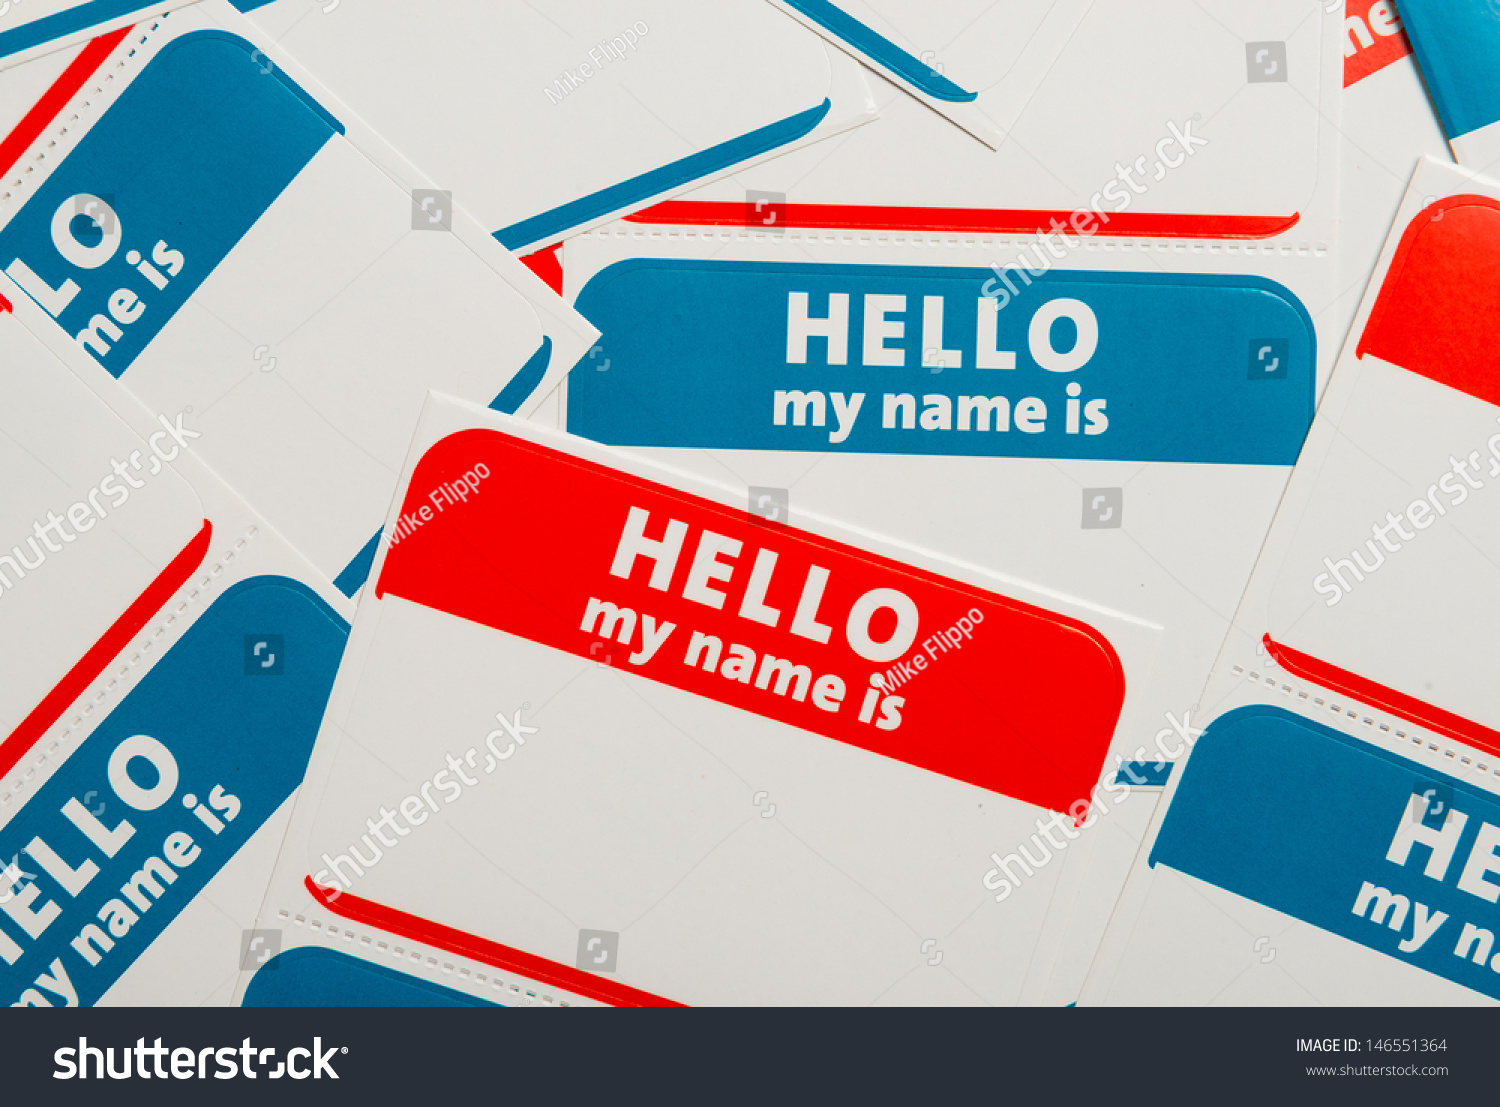 A stack of blue and red "Hello, my name is" name tags or badges #146551364